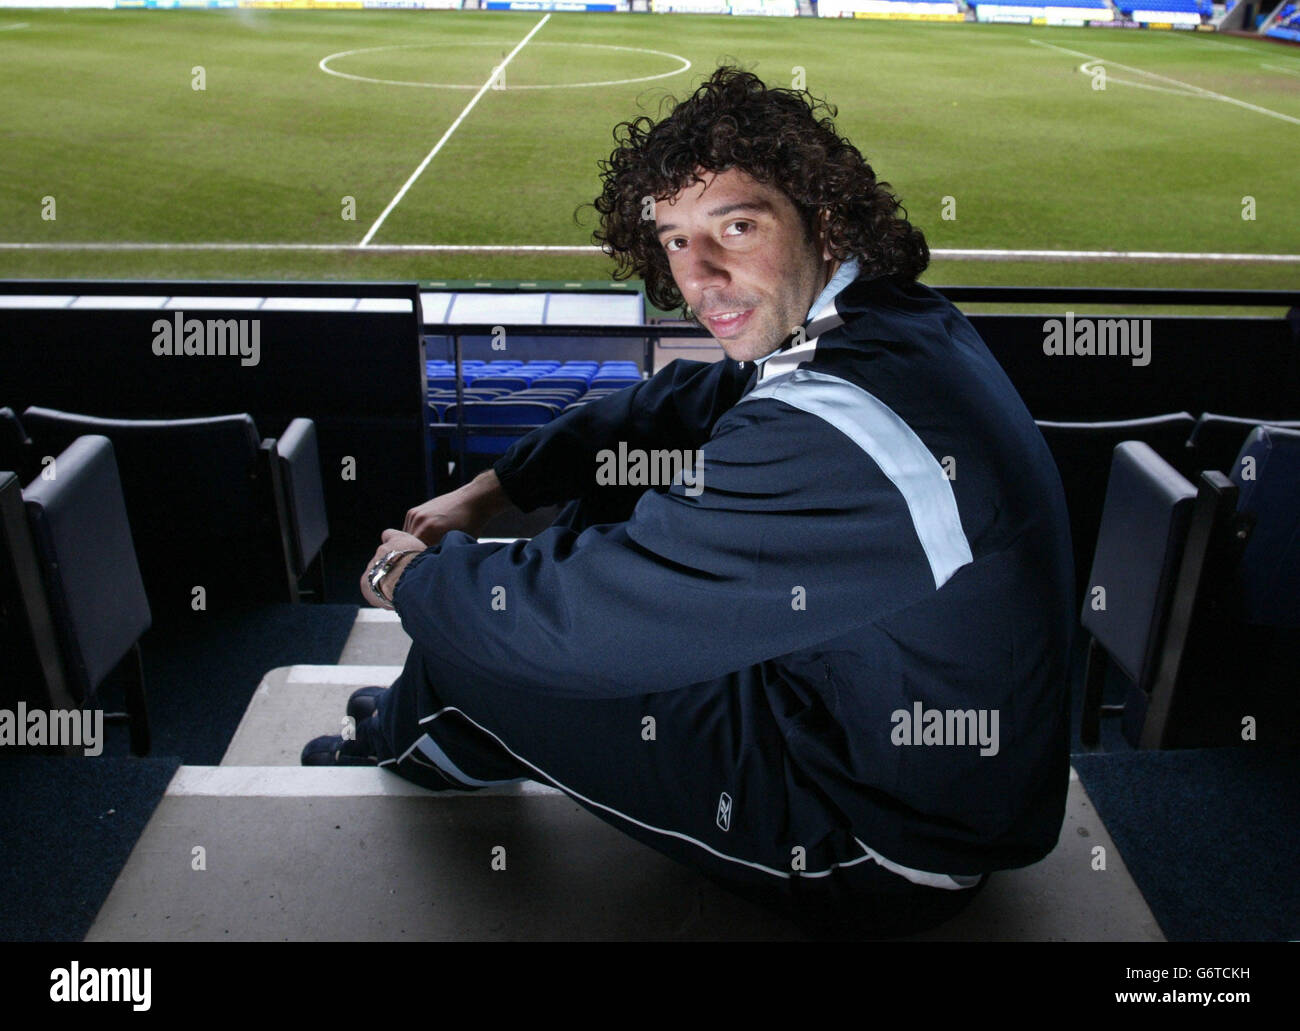 Bolton Wanderers' Ivan Campo at the preview press confrence for this Sunday's final of the Carling Cup at Cardiff's Millennium Stadium, against Middlesbrough. Press Confrence at The Reebok Stadium, Bolton. Stock Photo